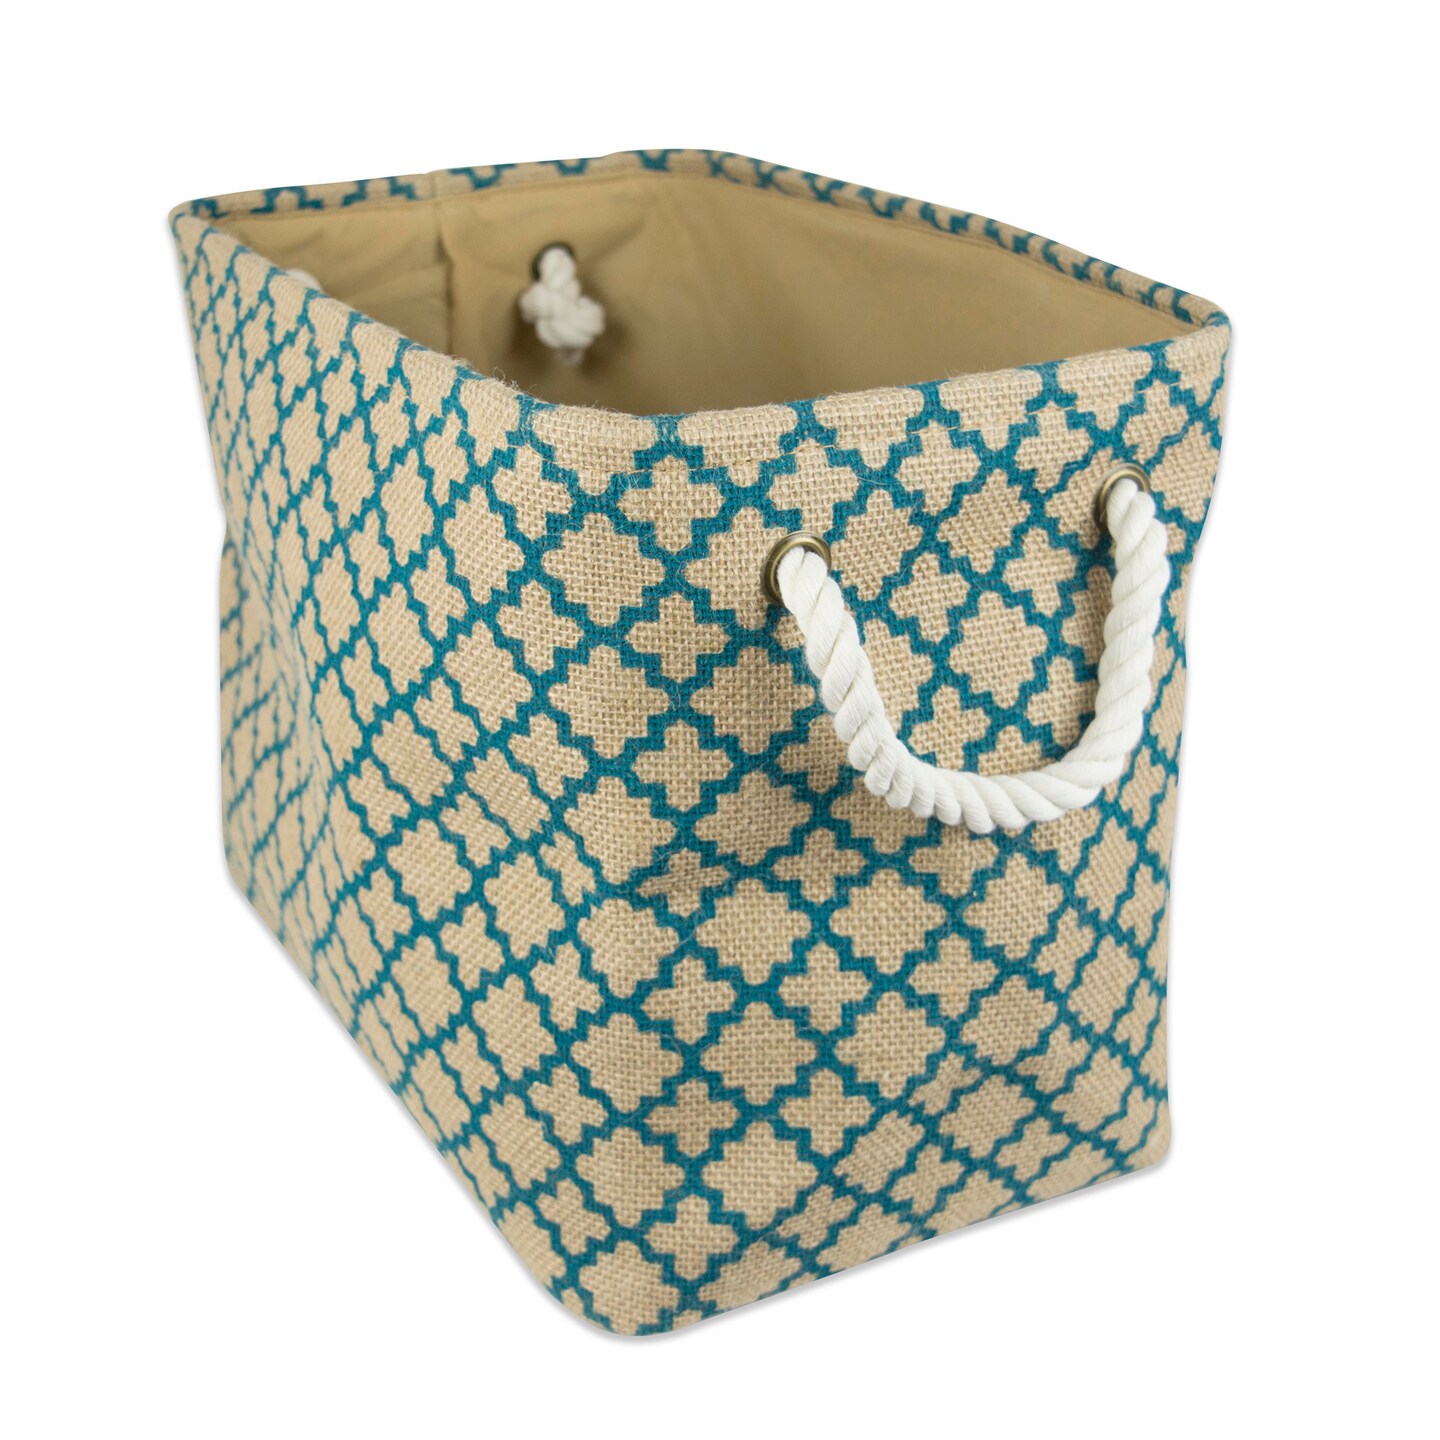 Roomy Shopping Bag Pattern - with cute rope handles!